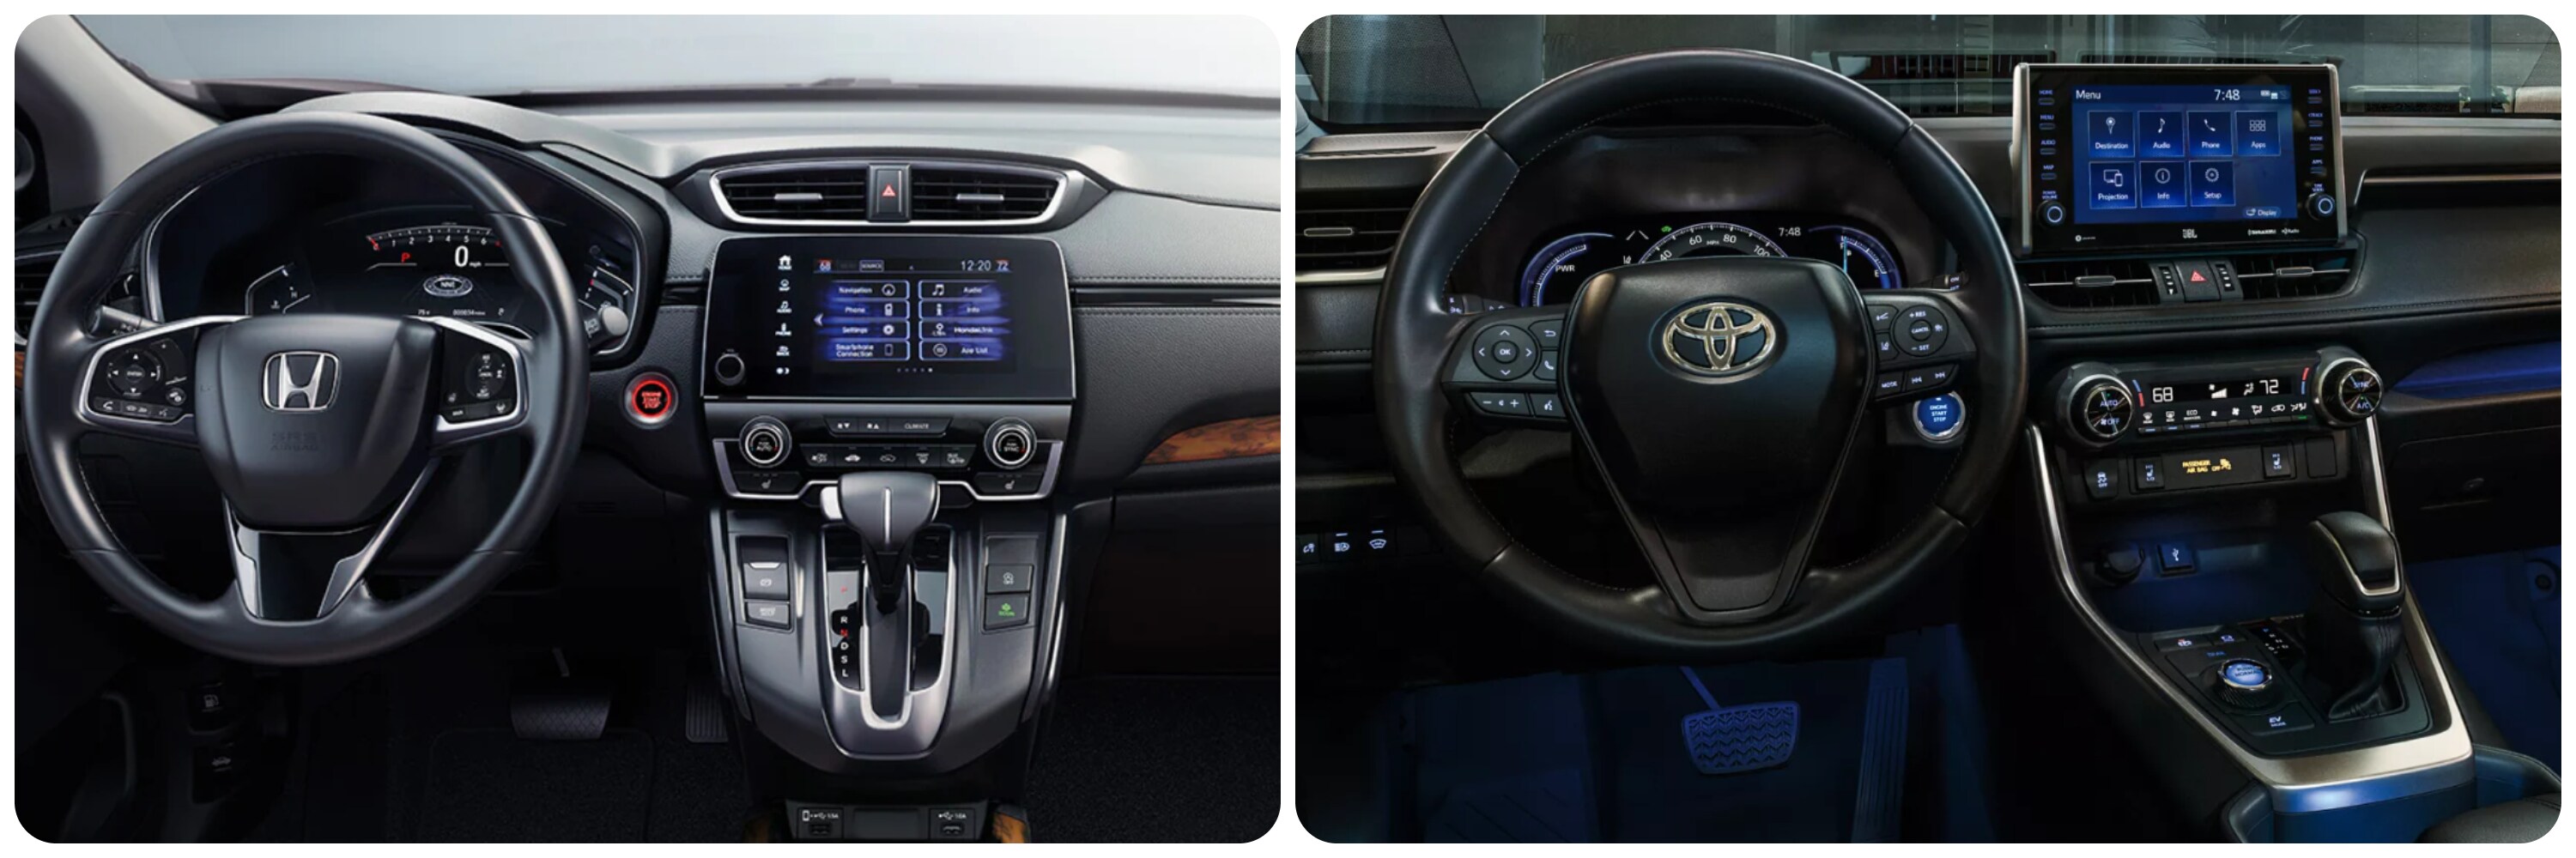 On the left a view of the dash and infotainment system of a 2022 Honda CR-V, on the right a view of the dash and infotainment system of a 2022 Toyota RAV4